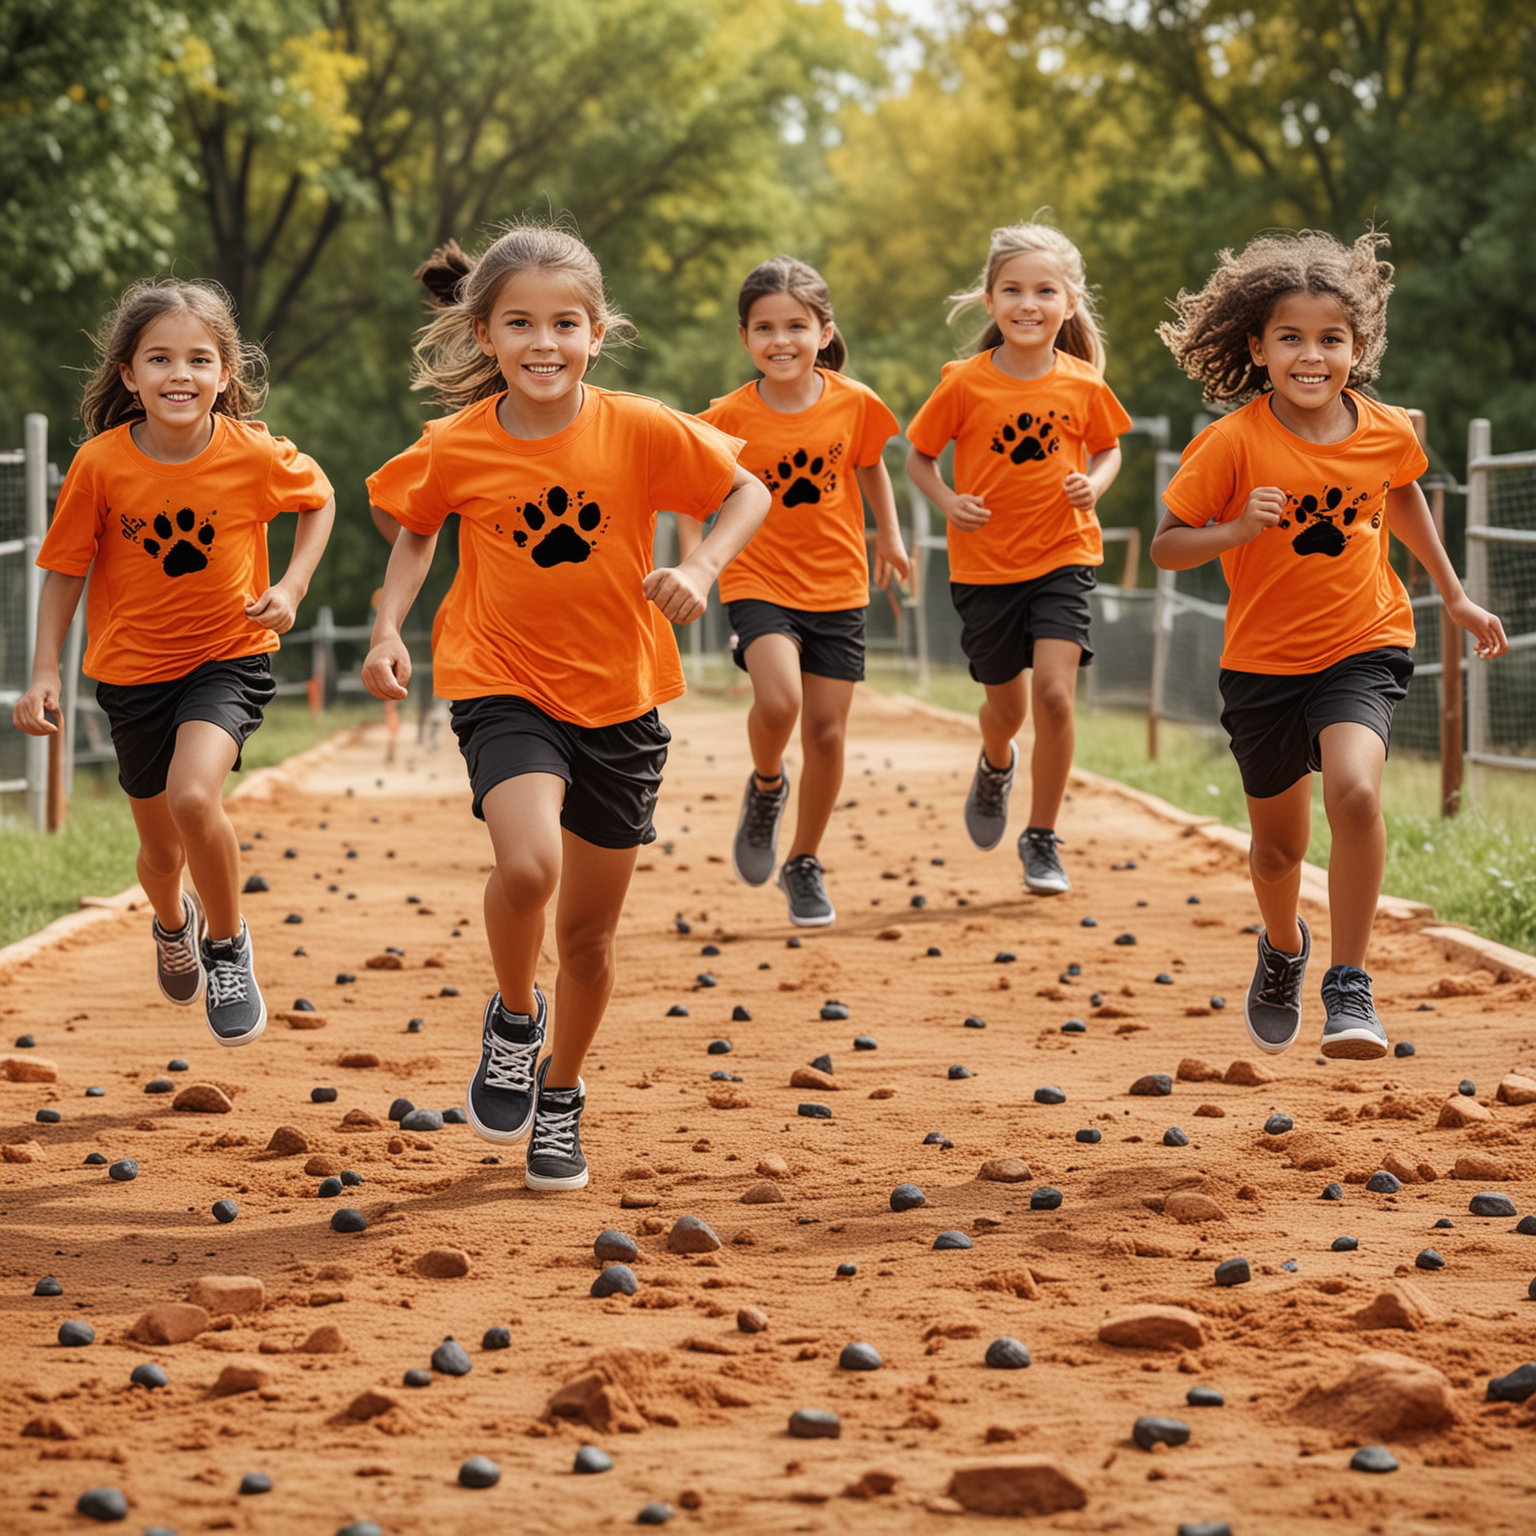 create a realistic image of   a group of 
children ages 4-6 wearing orange shirt with black paw print, black shorts and sneakers running on a colorful obstacle course with beautiful outdoor background